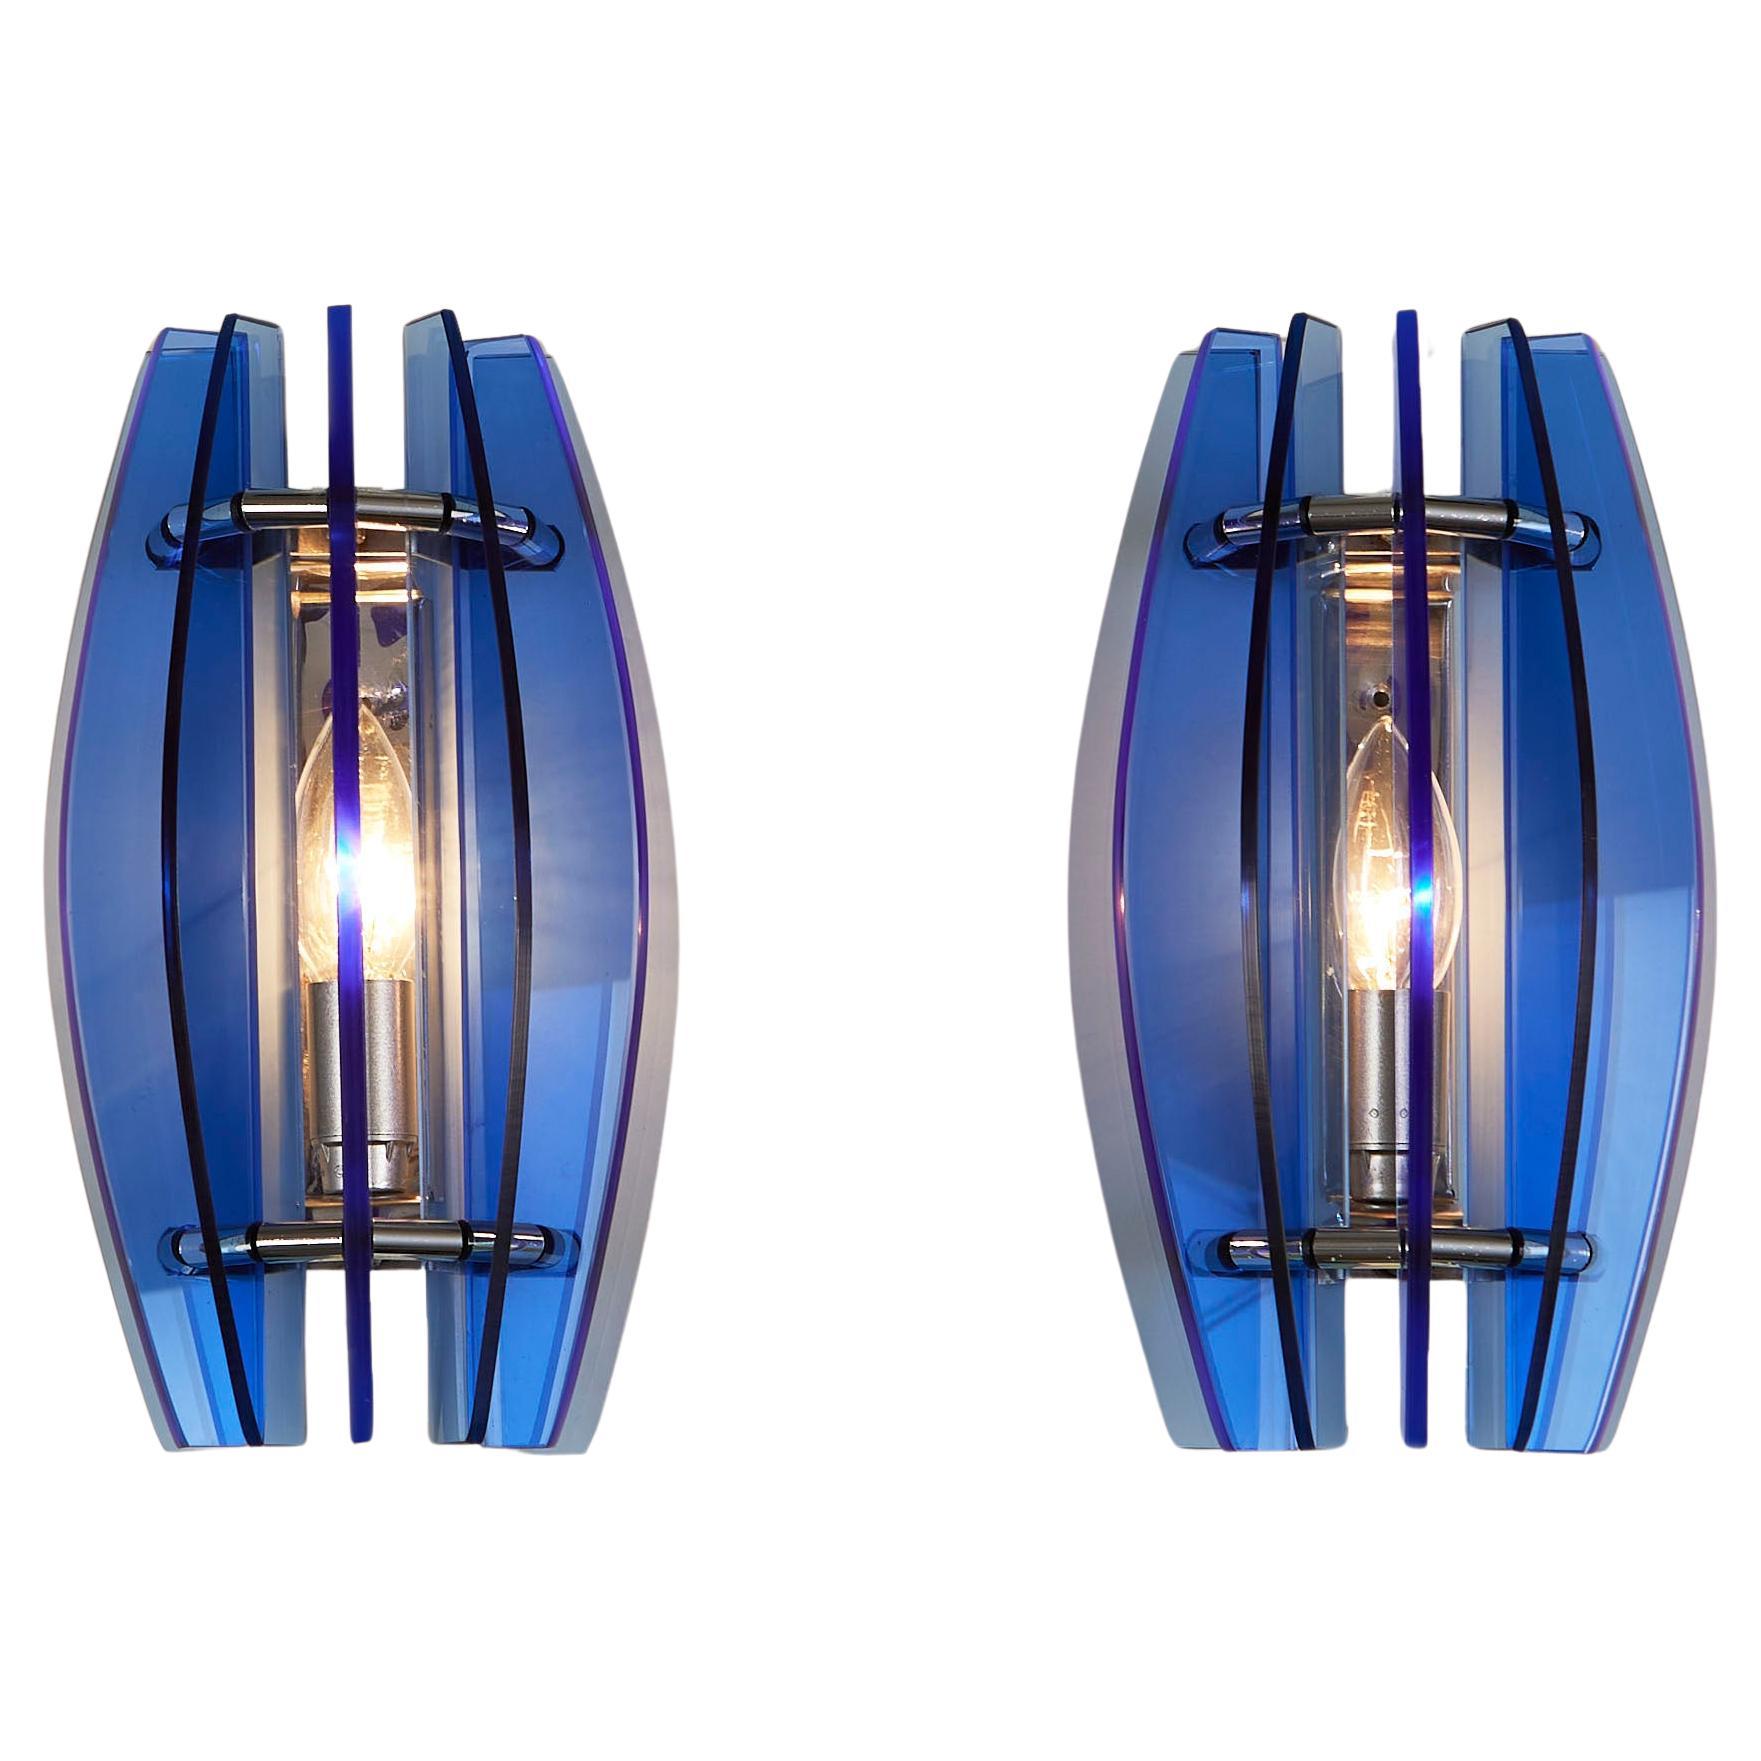 Pair of 1970s Italian chrome and blue glass wall lights by Veca